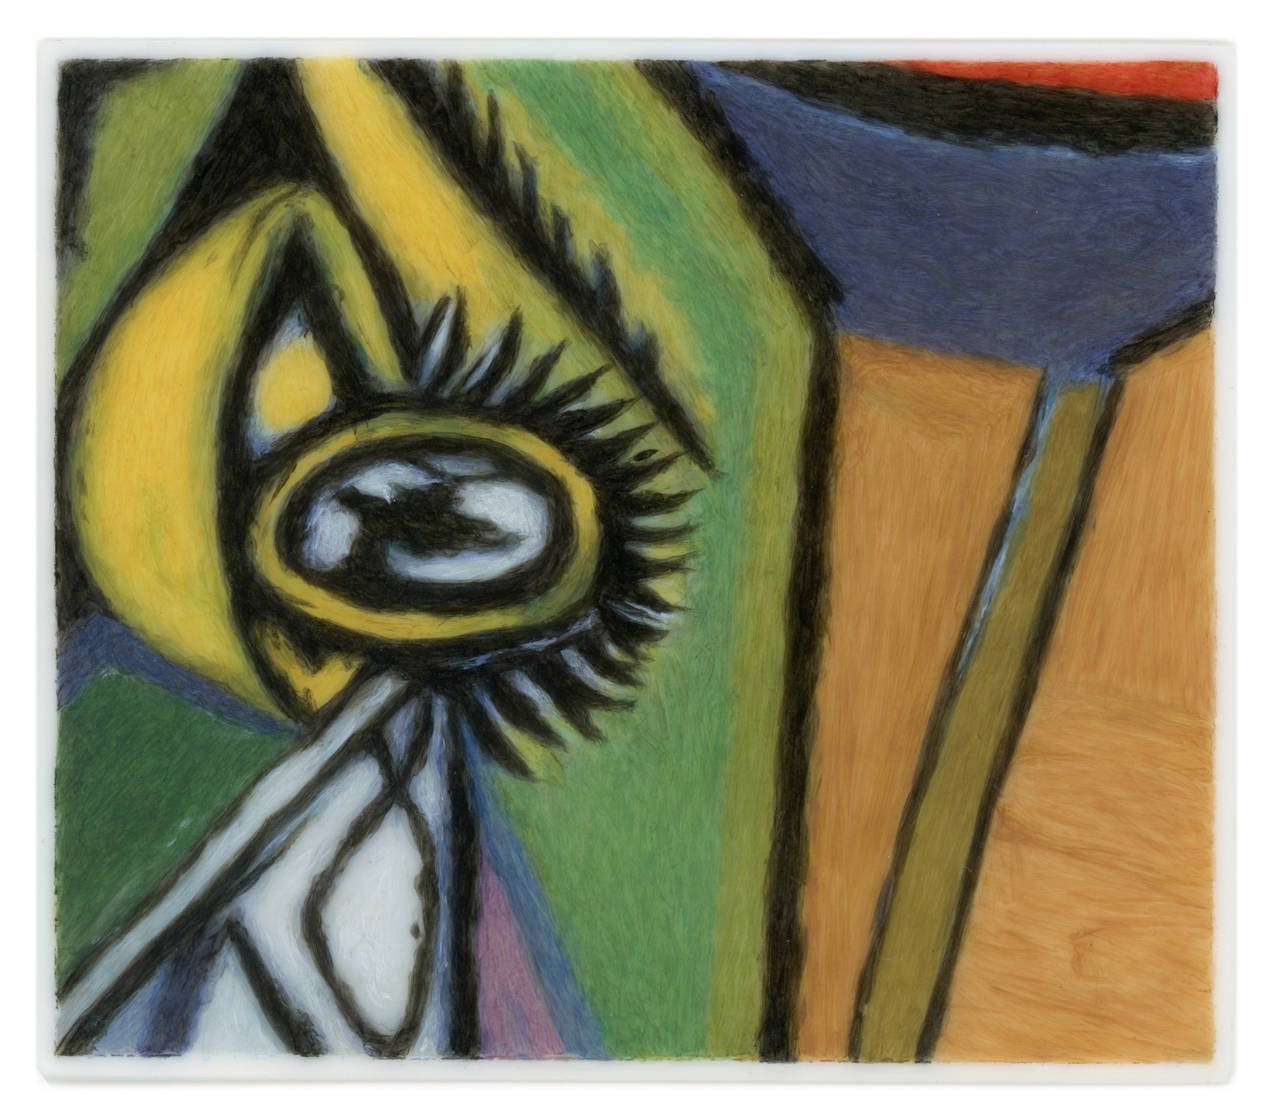 Lover's Eye III: Dora IV (after Picasso) - Painting by Tabitha Vevers